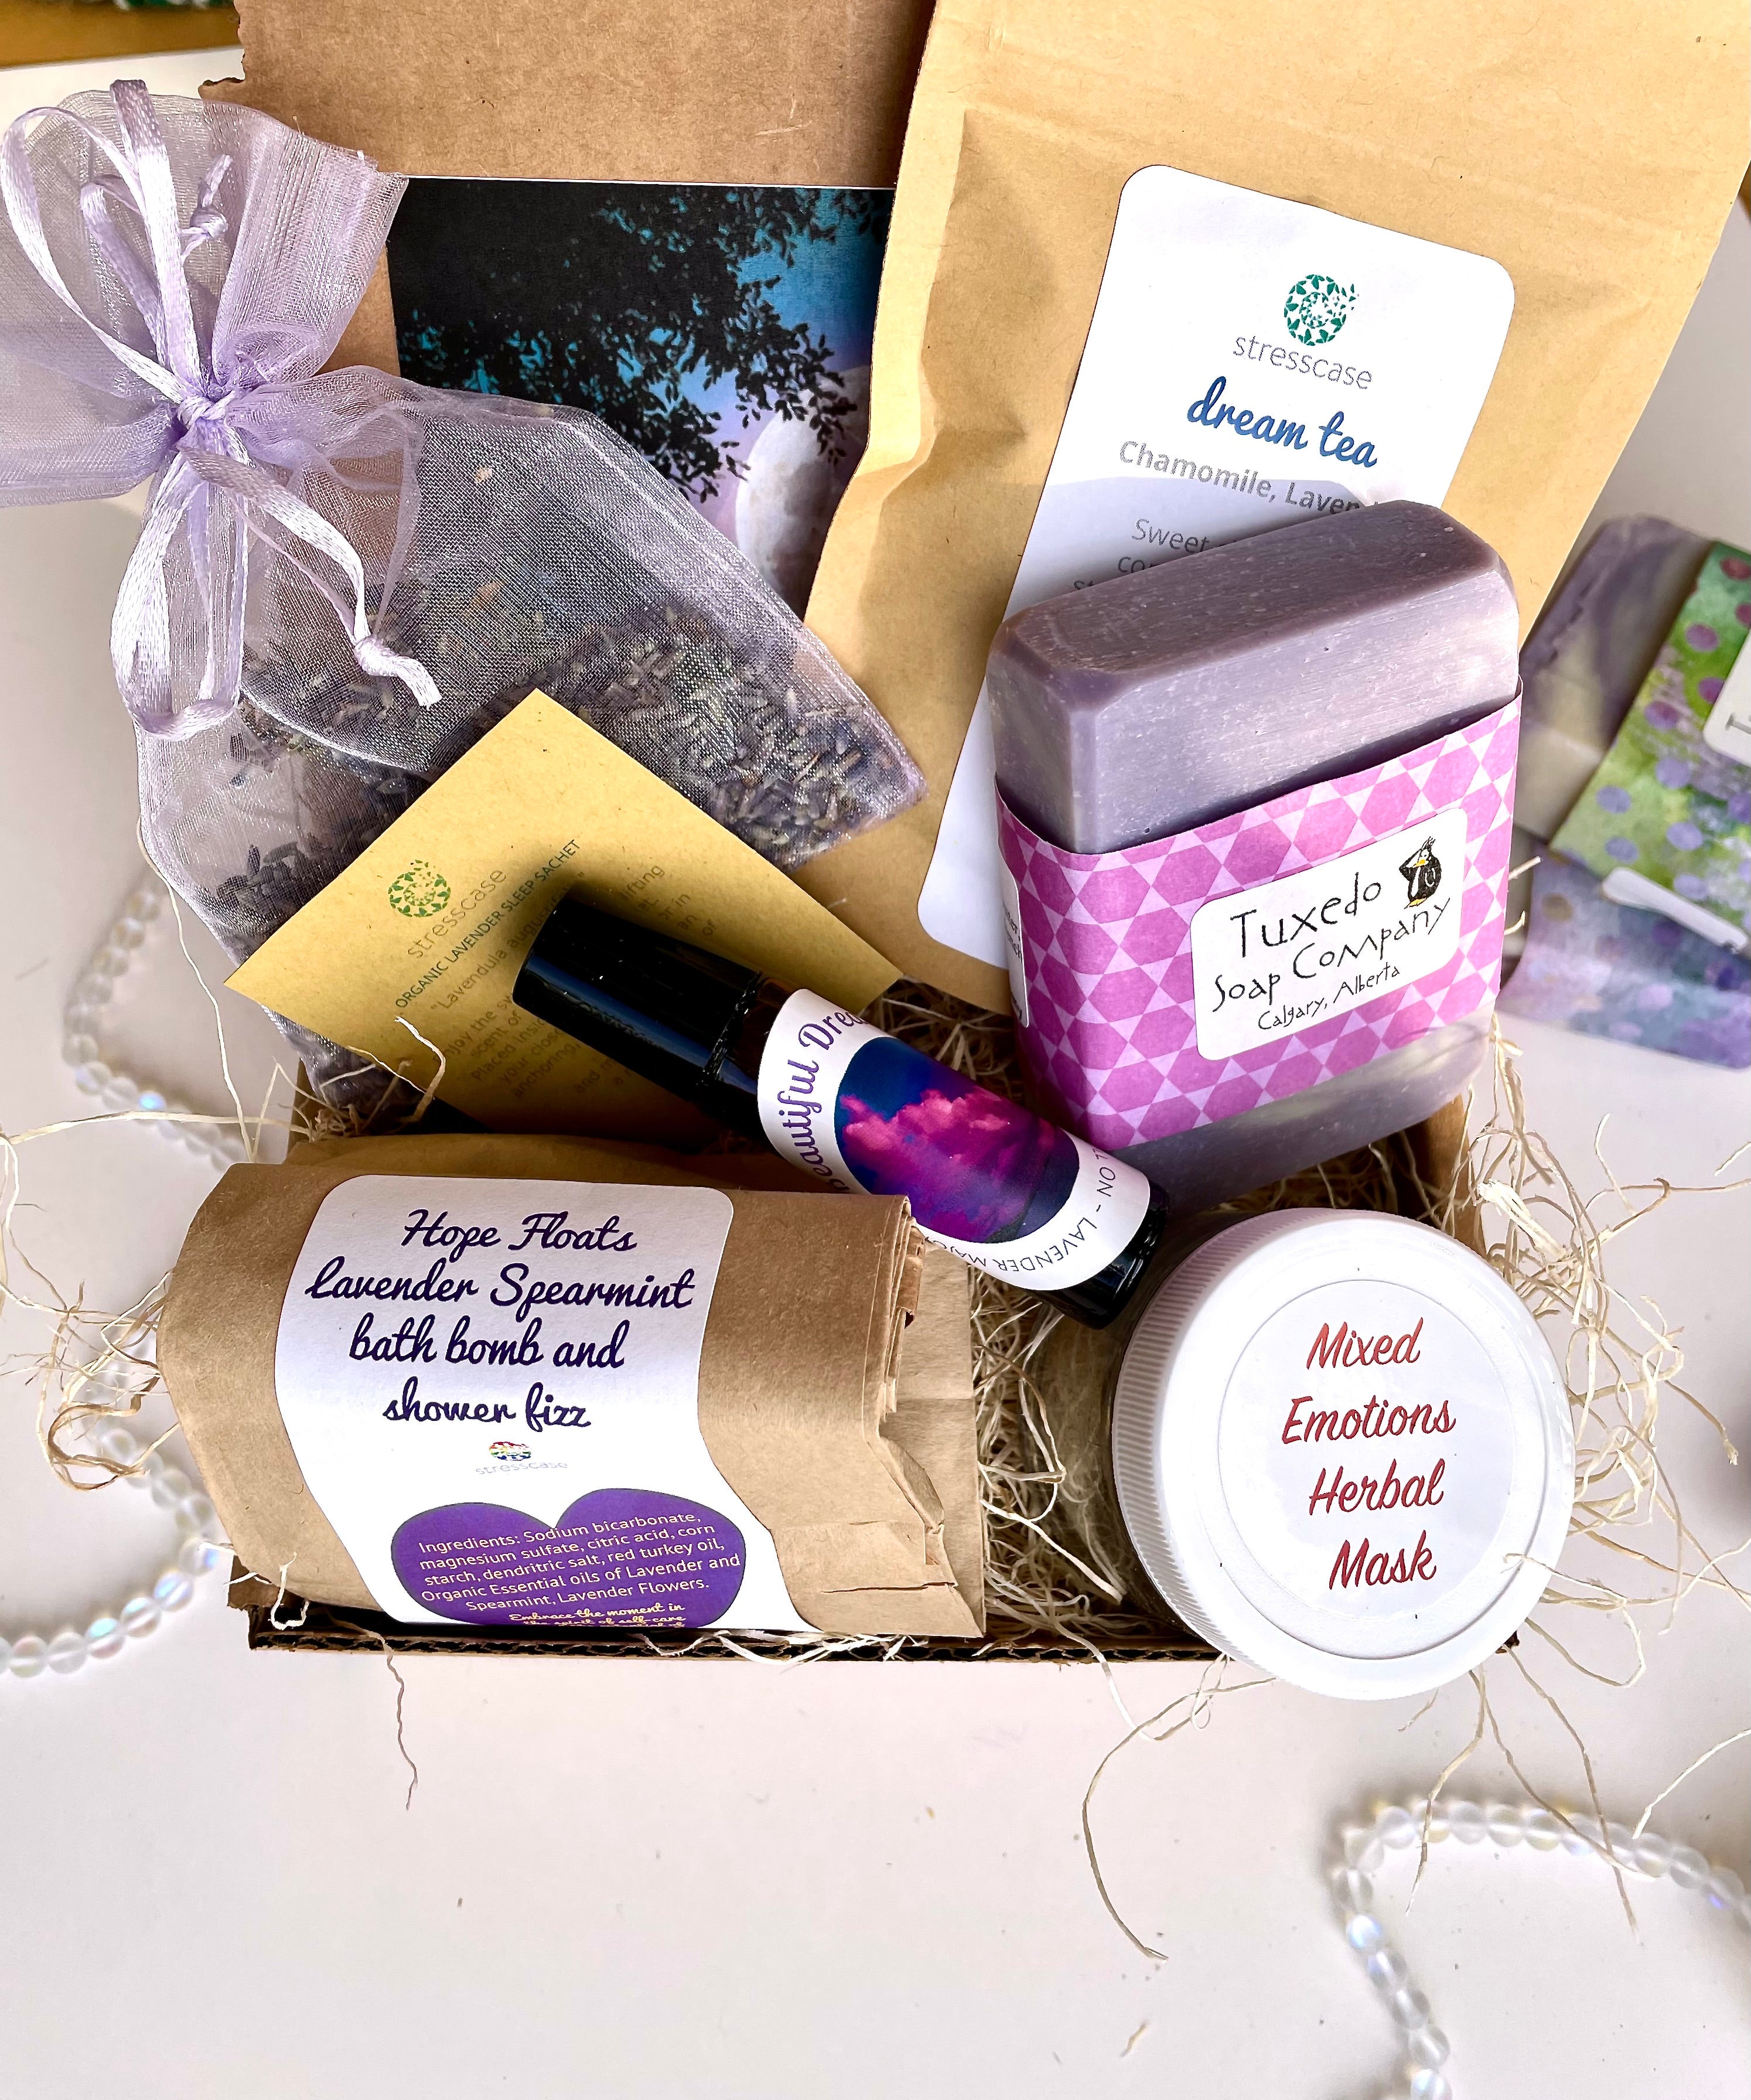 gift baskets Calgary gift shop Calgary gift baskets corporate gifts swag handmade gifts natural apothecary natural gender neutral self-care kit stress relief anxiety relief gifts admin assistant gifts mental health employee gifts personalized gift boxes for recognition.